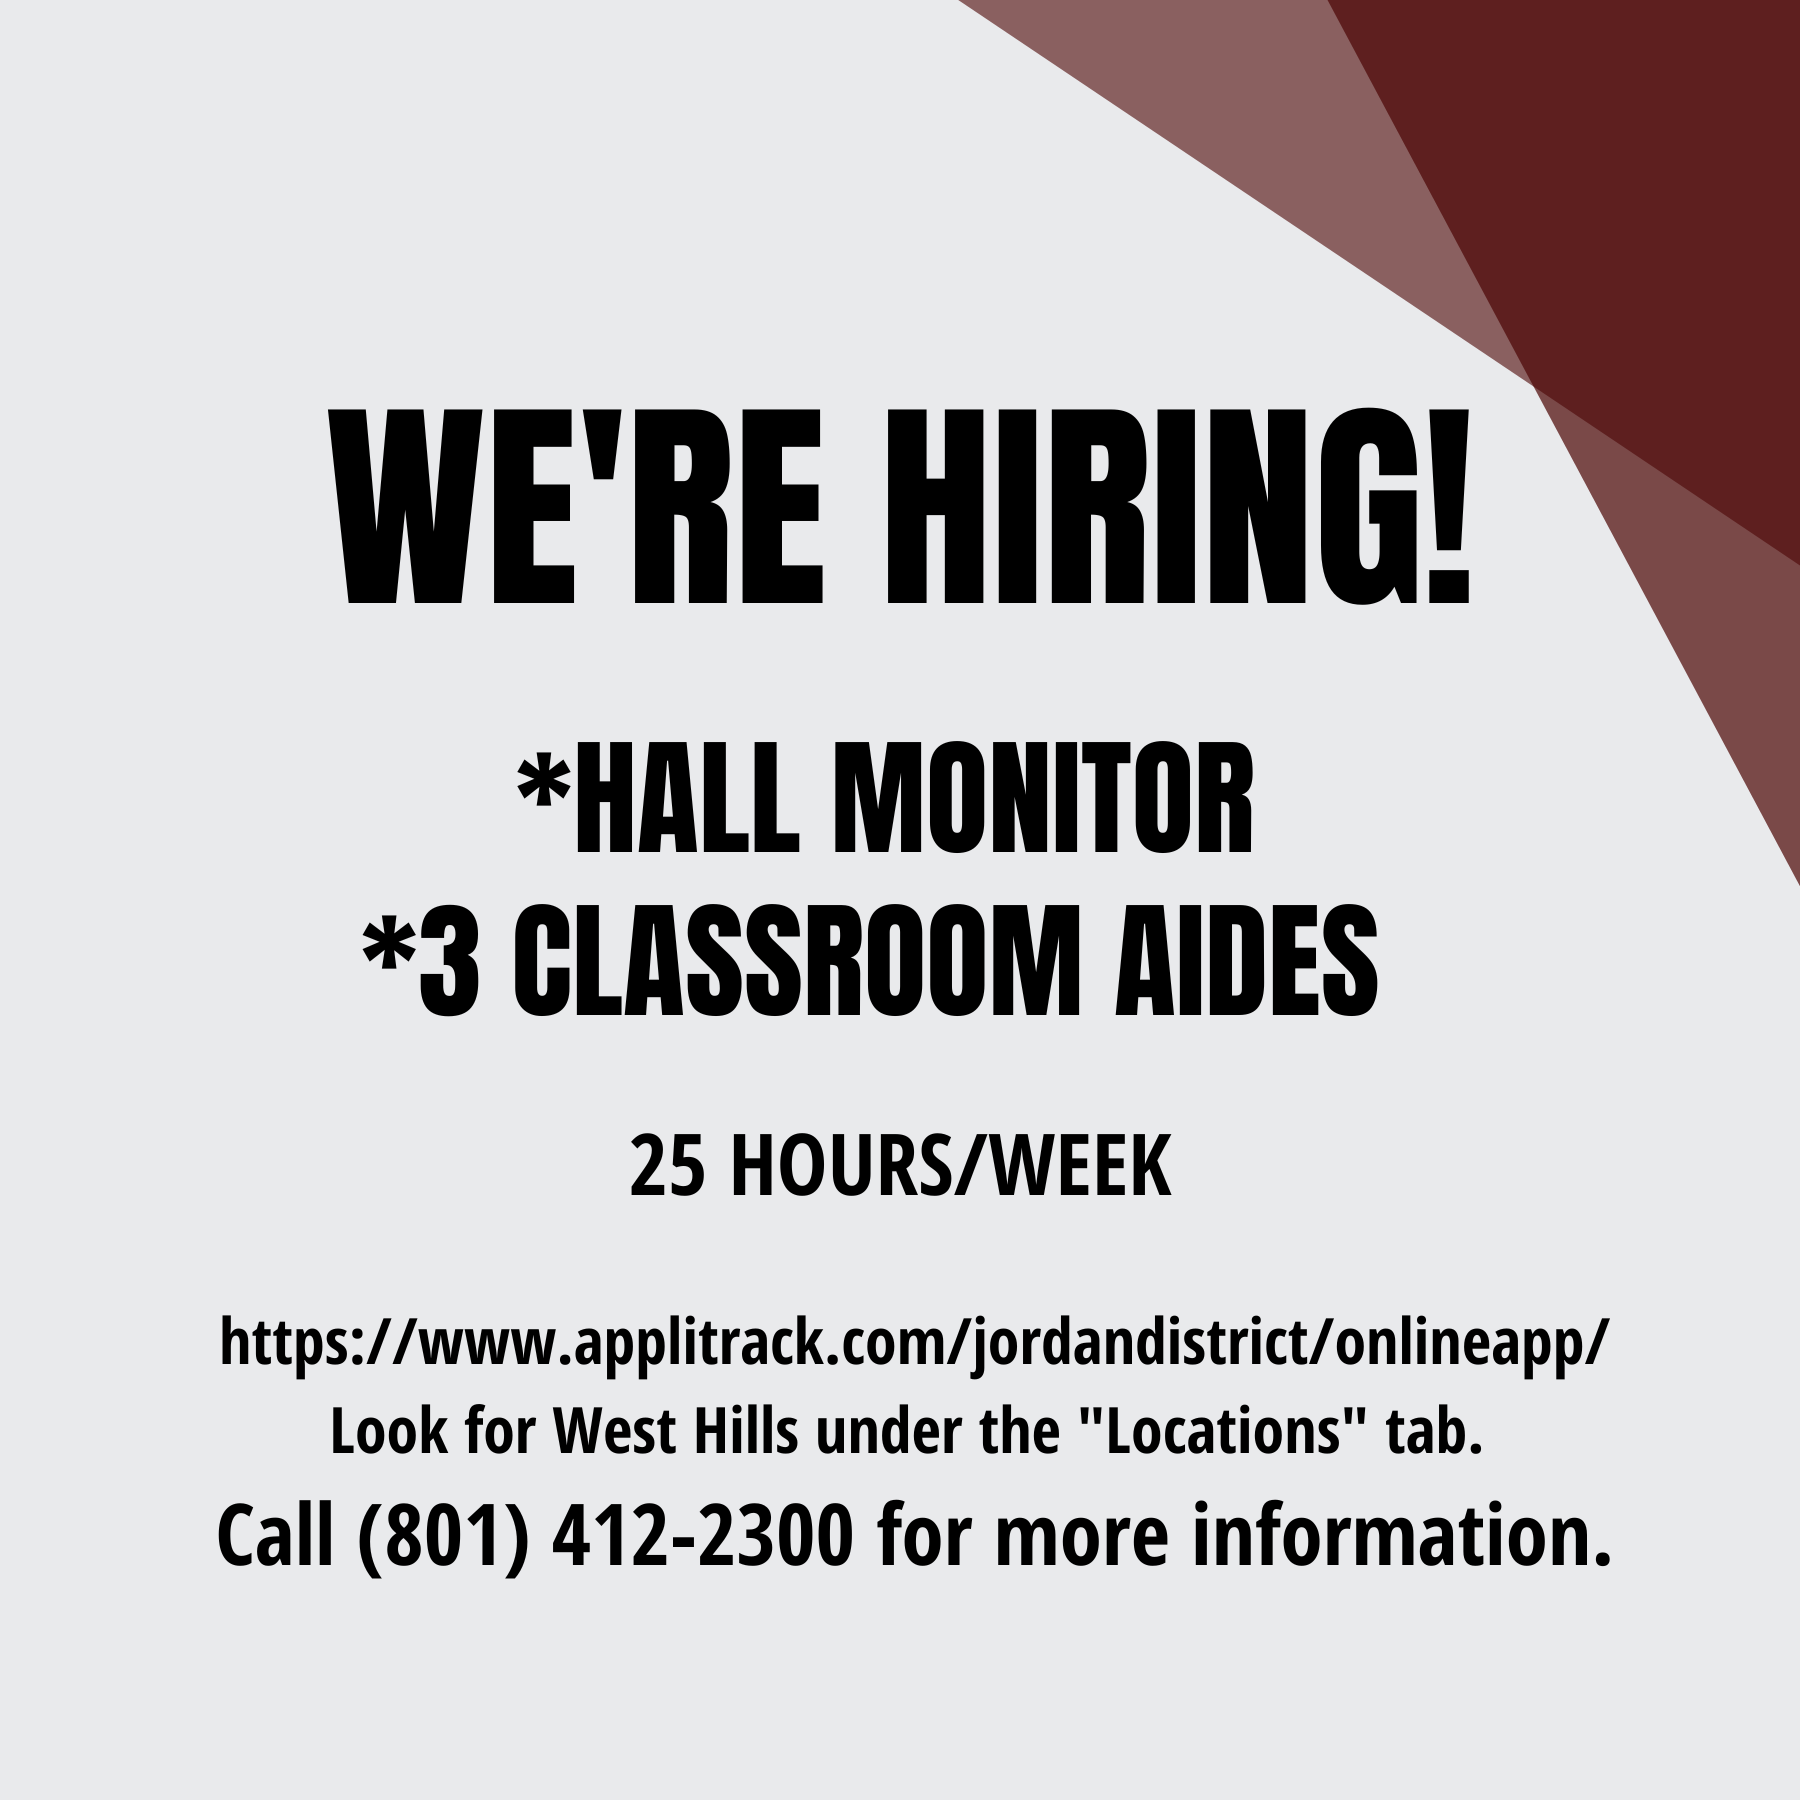 WHMS is hiring a hall monitor and 3 classroom aides.